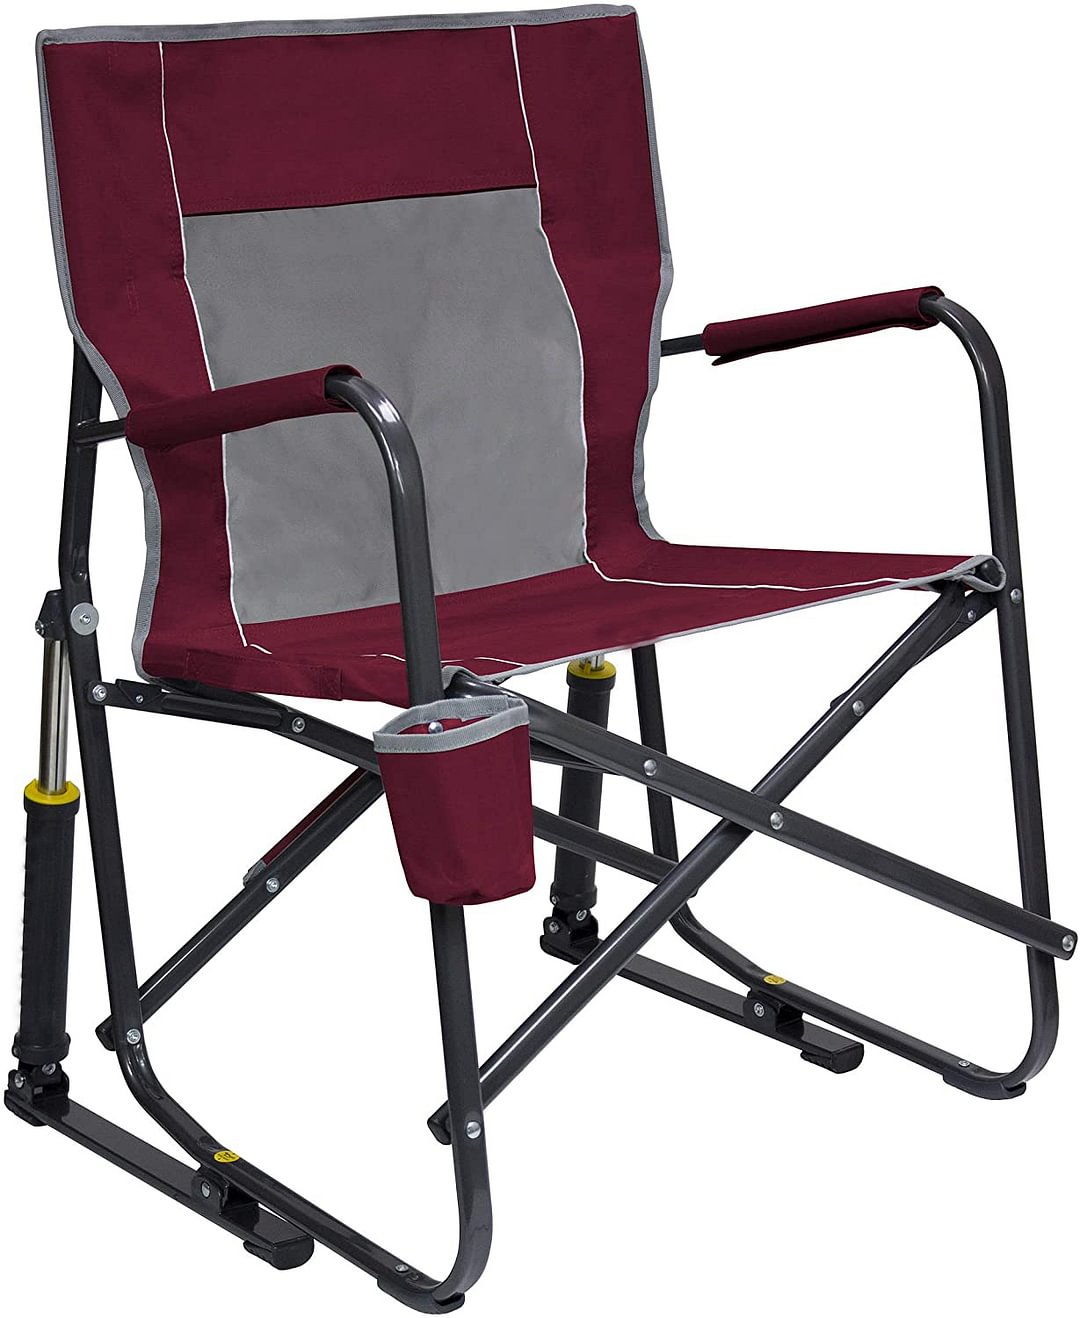 50 Off Only Today Portable Folding Rocking Chair